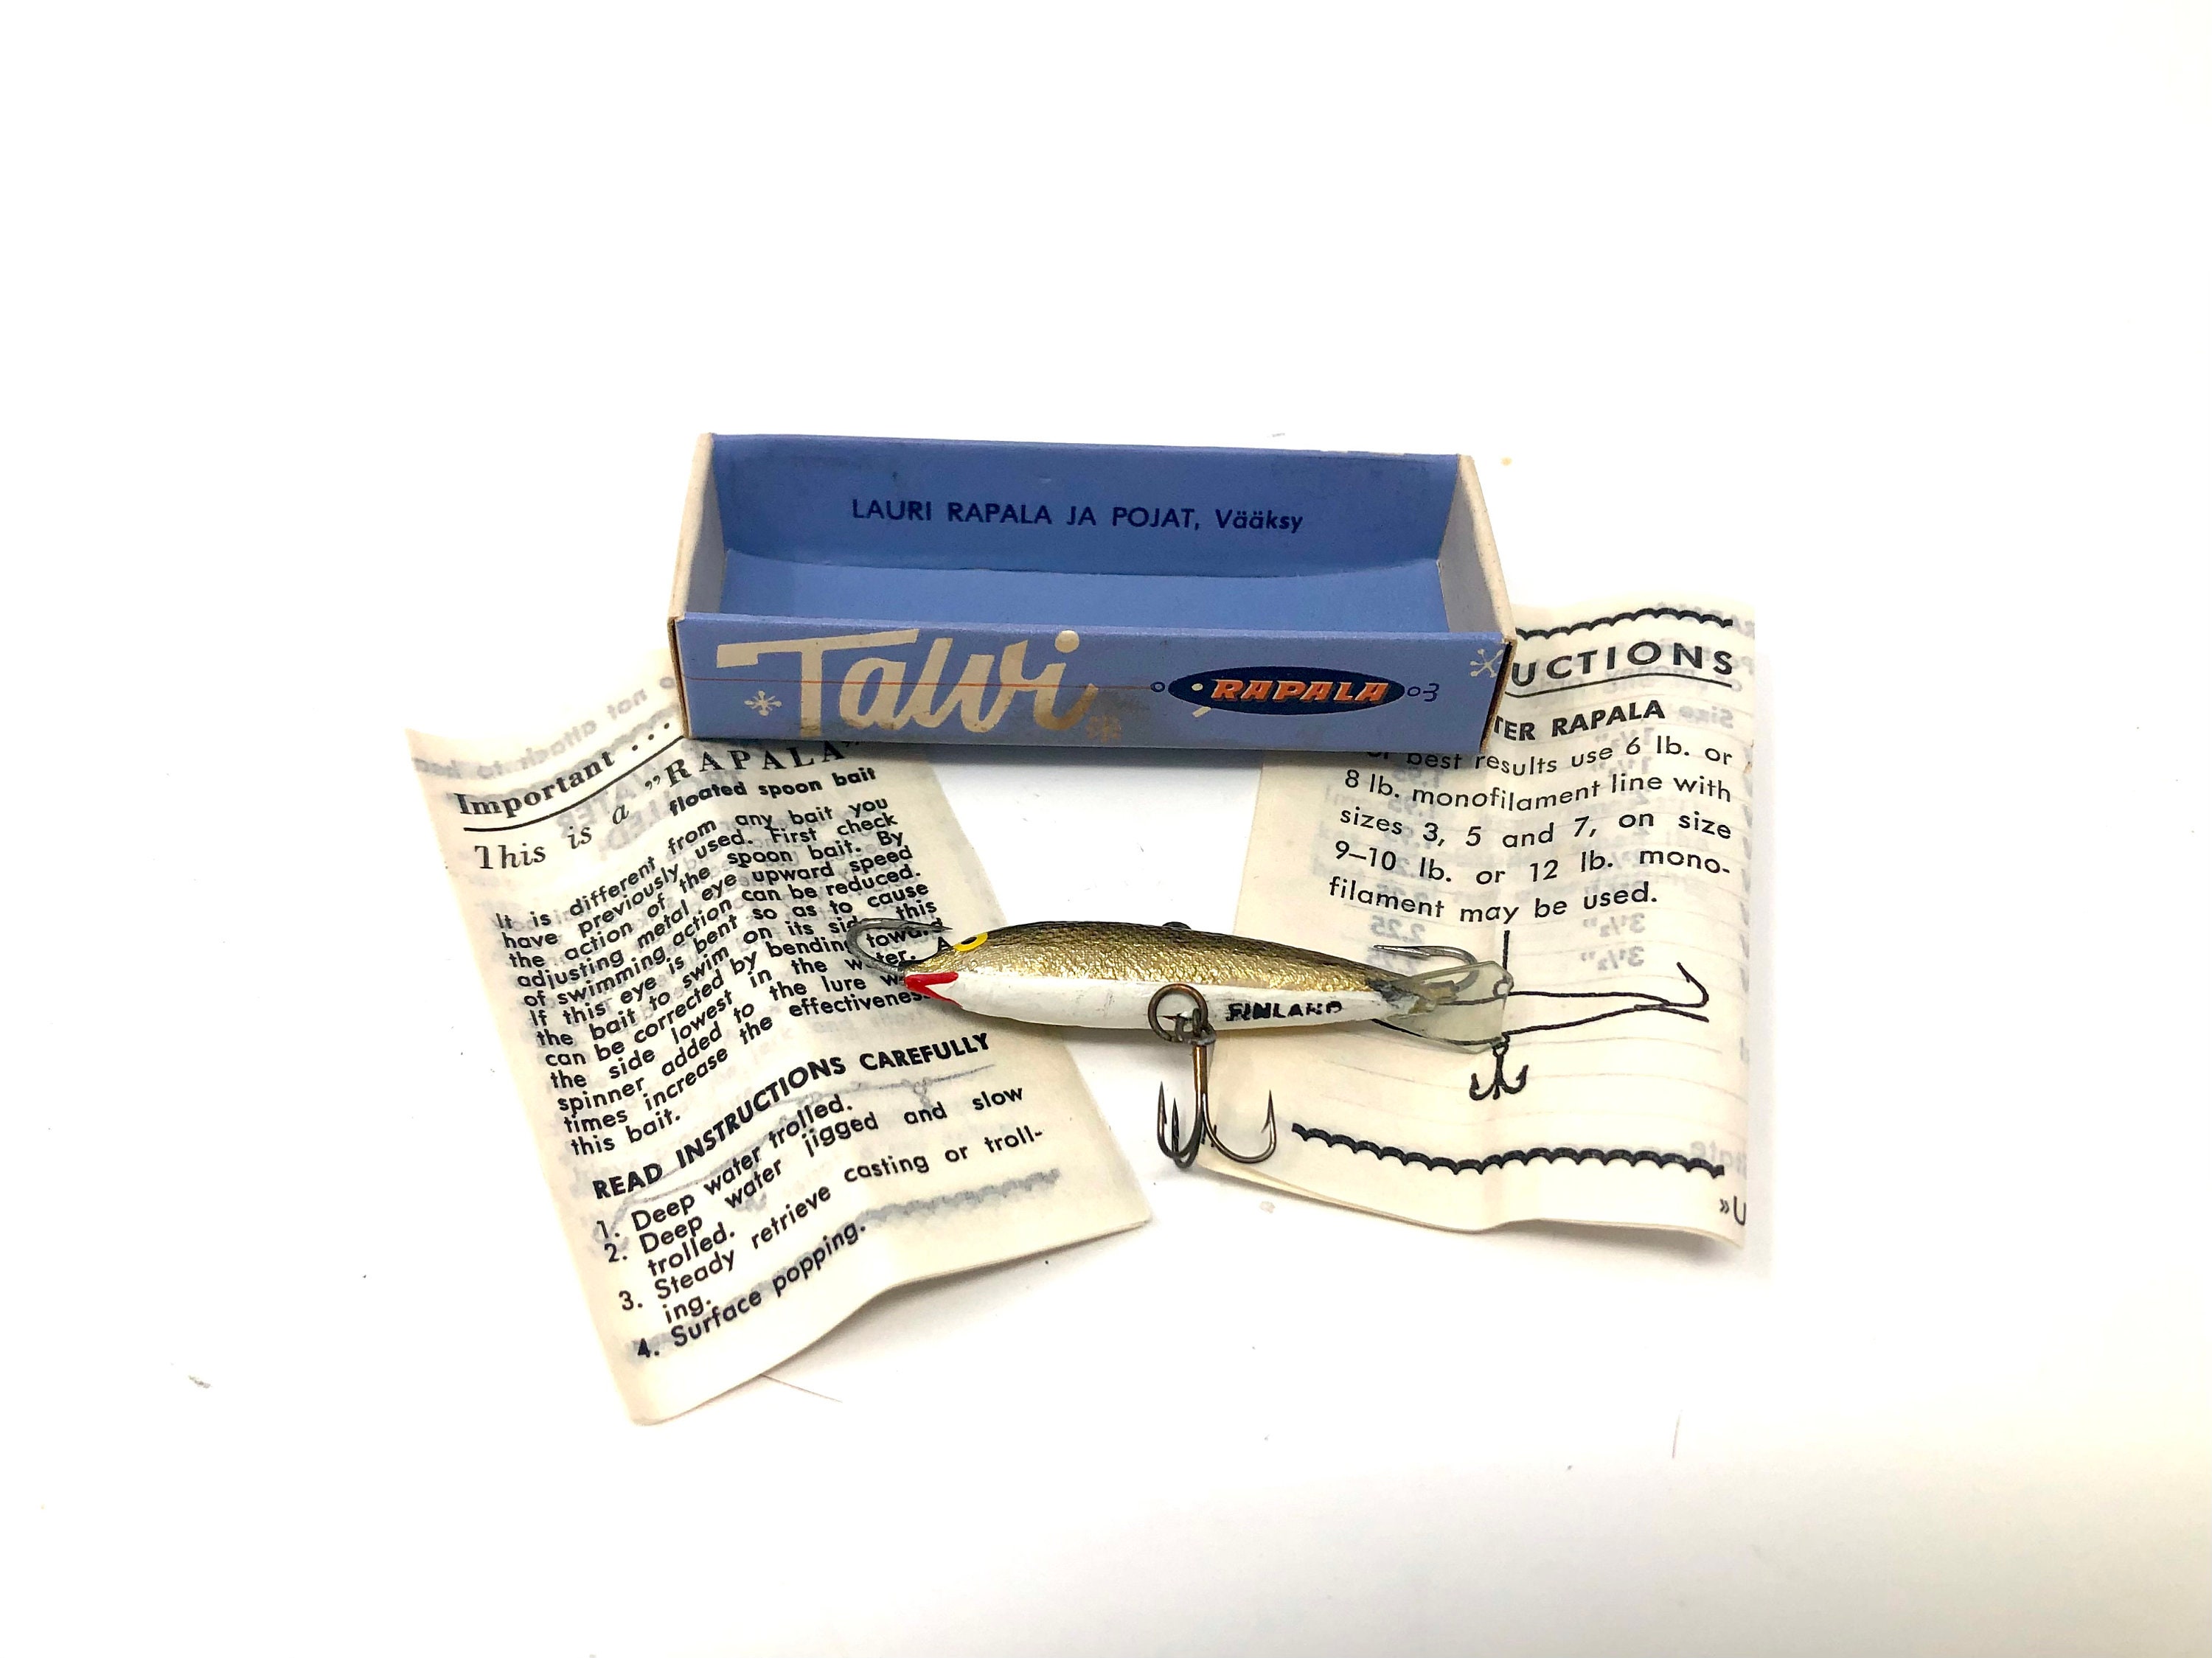 Rapala Winter Wobbler Vintage Ice Fishing Lure with Box and Papers /  Antique Ice Fishing Lure Rapala Winter Wobbler